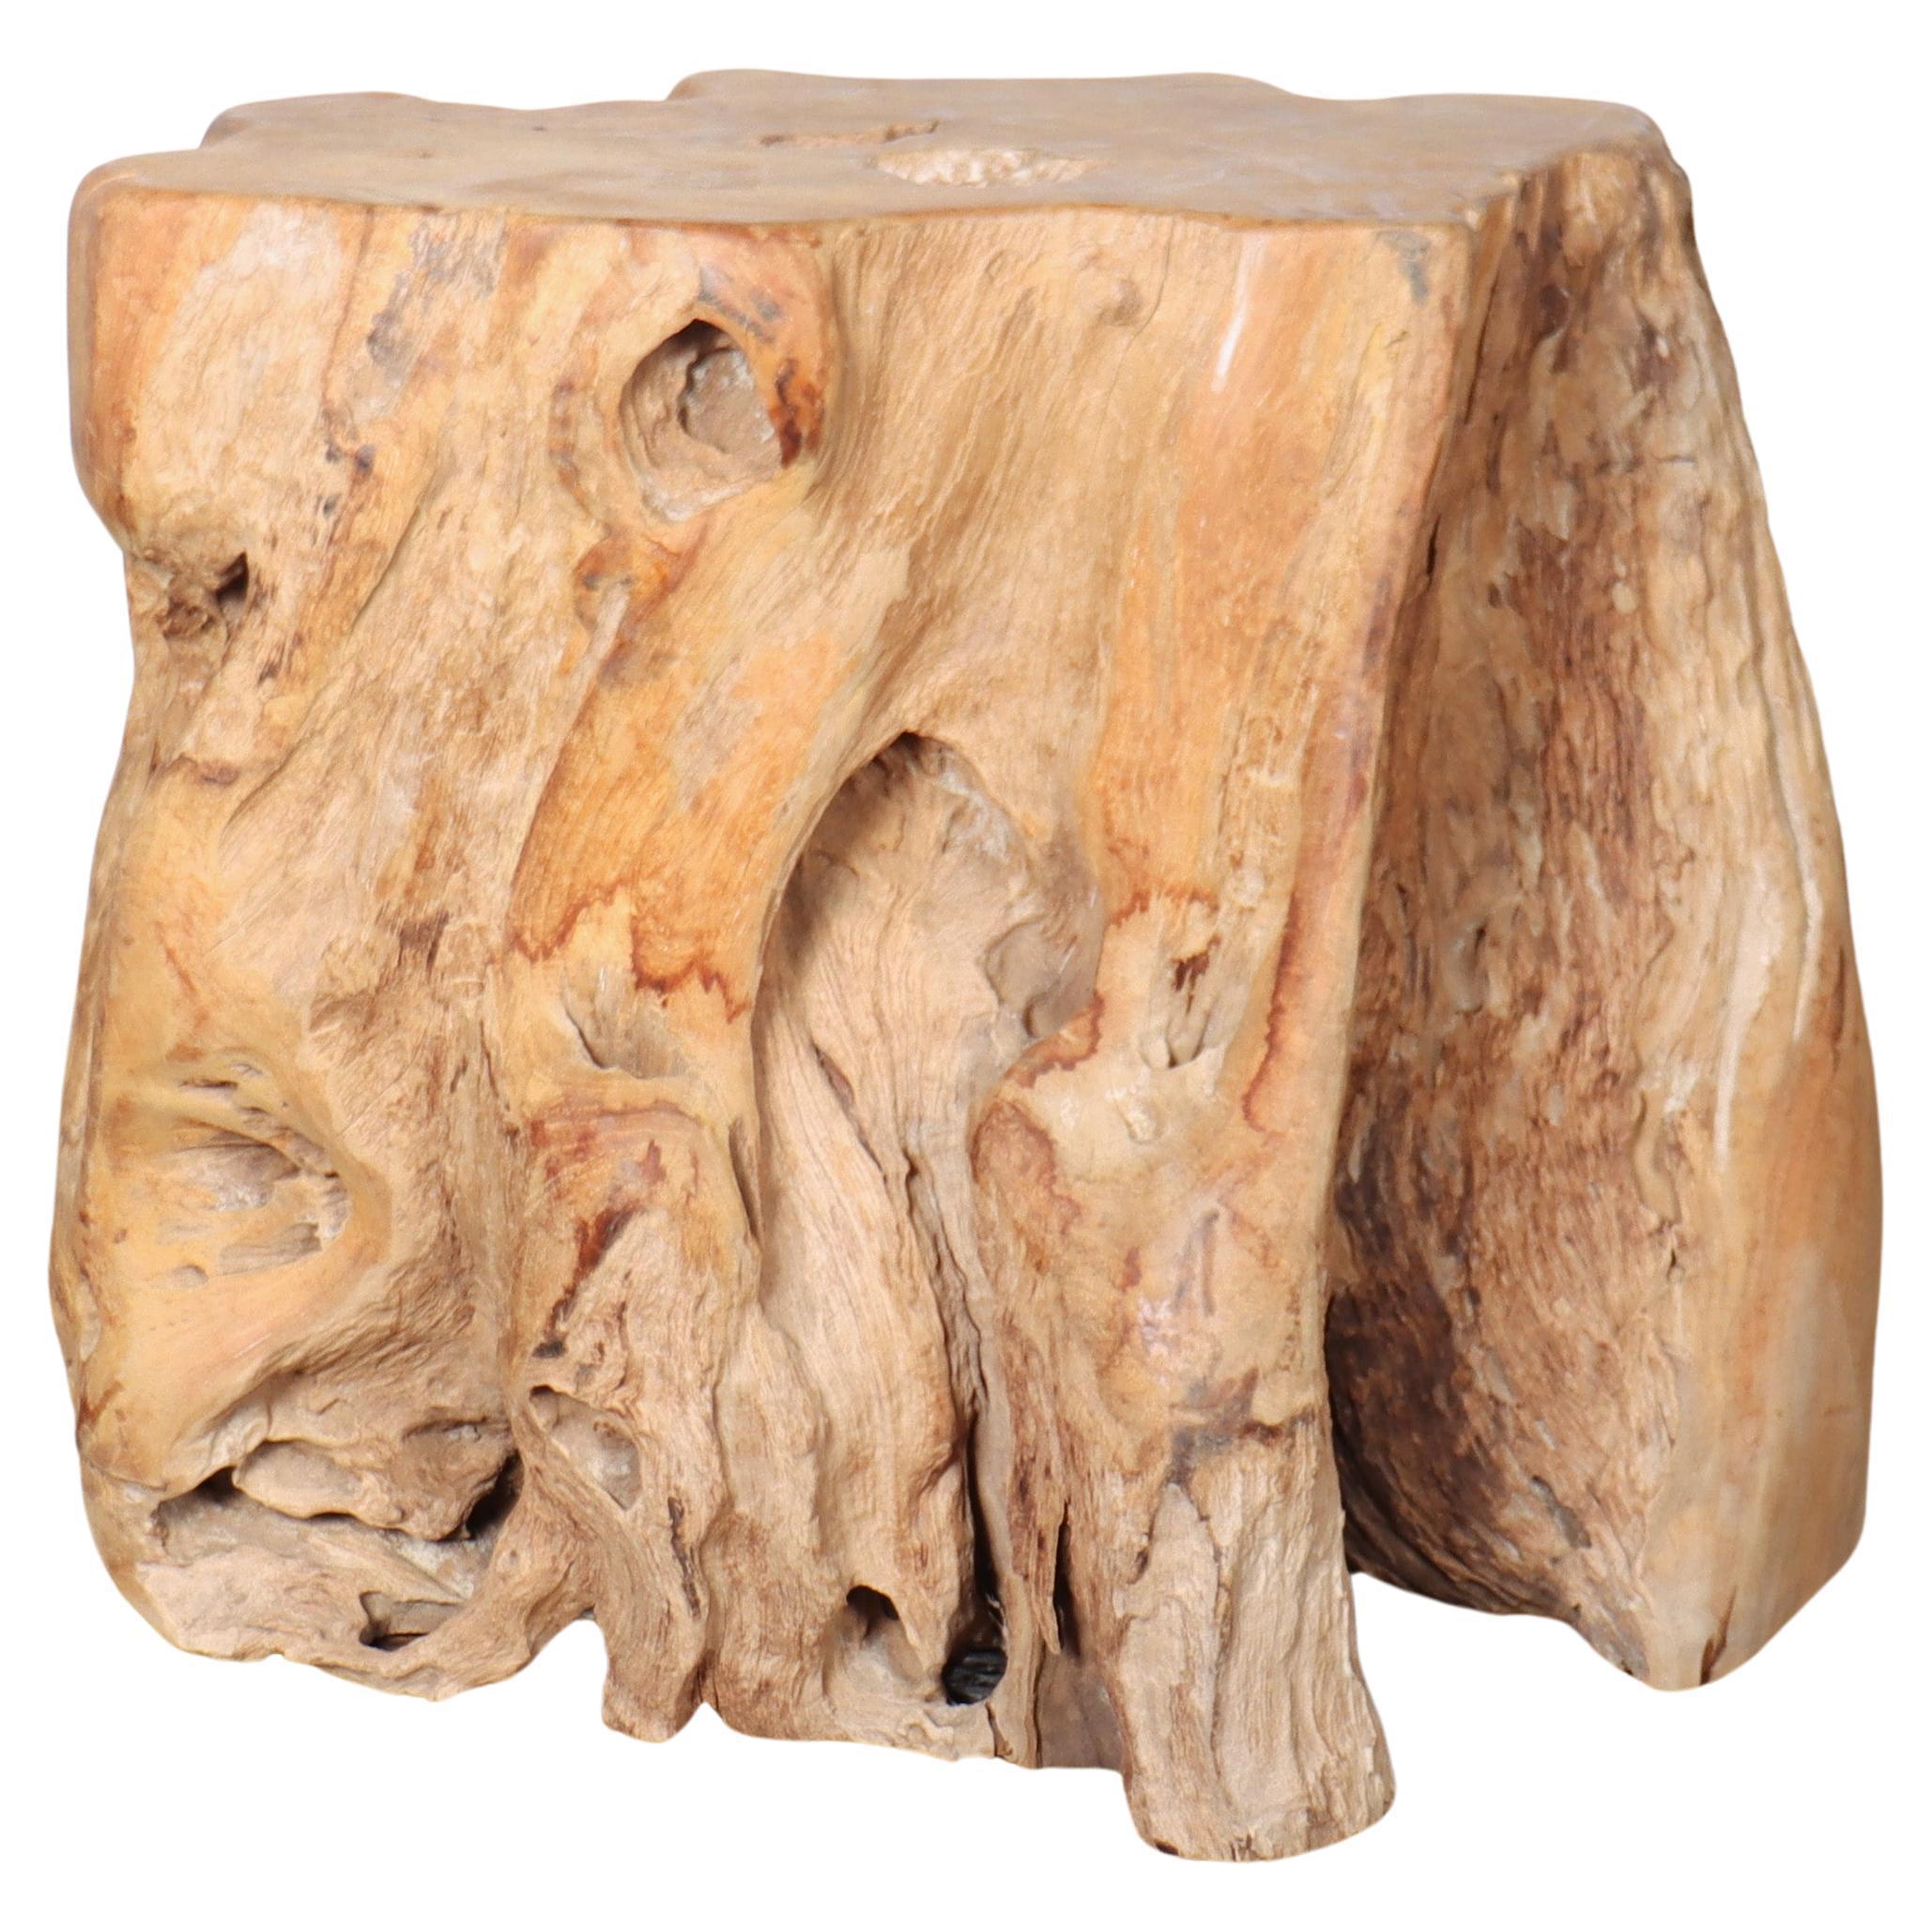 Sculptural Root Side Table